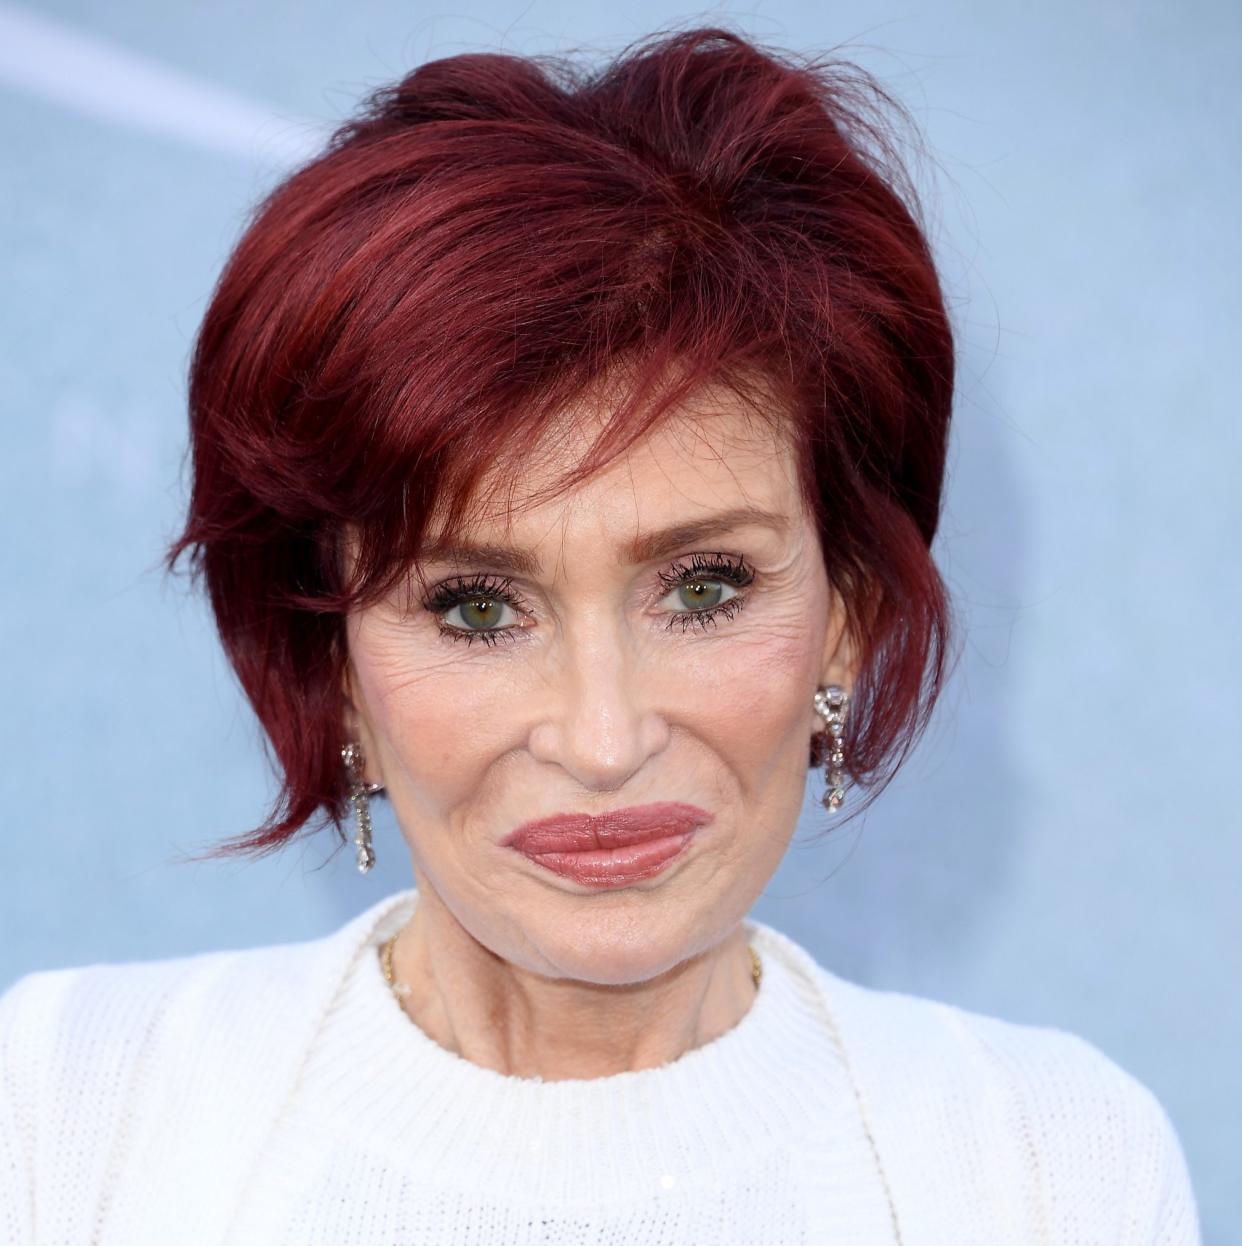 Sharon Osbourne spoke out last year about the effects using Ozempic had on her face